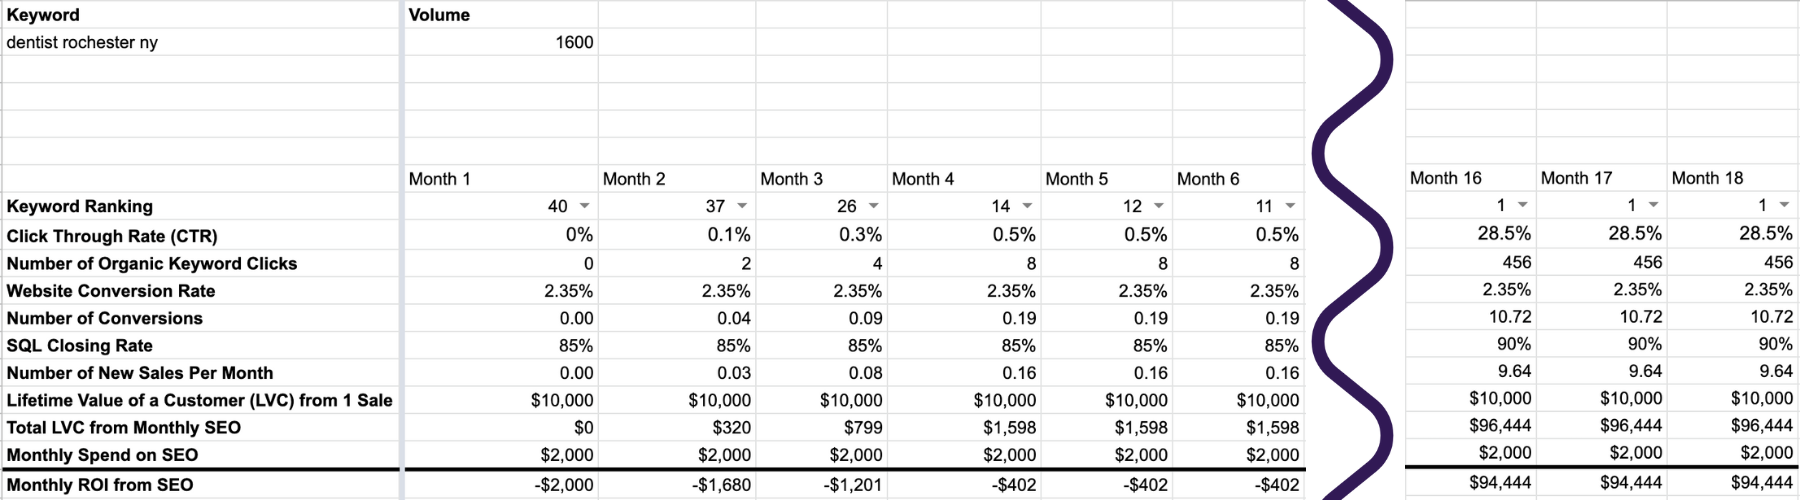 How to calculate the ROI for your SEO marketing strategy